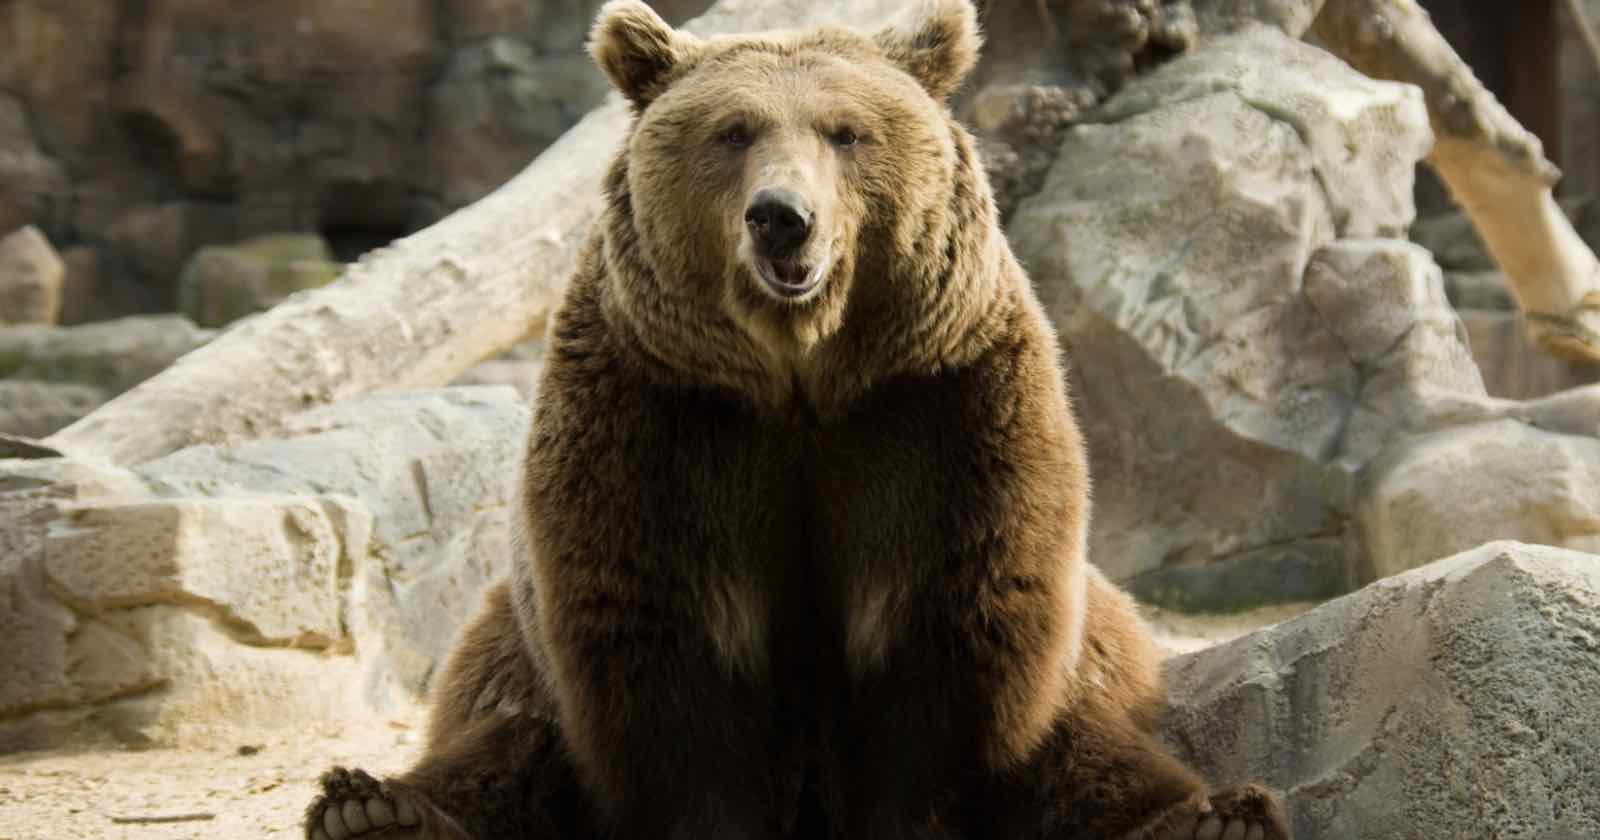  tourist mauled bear after rolling down car window 